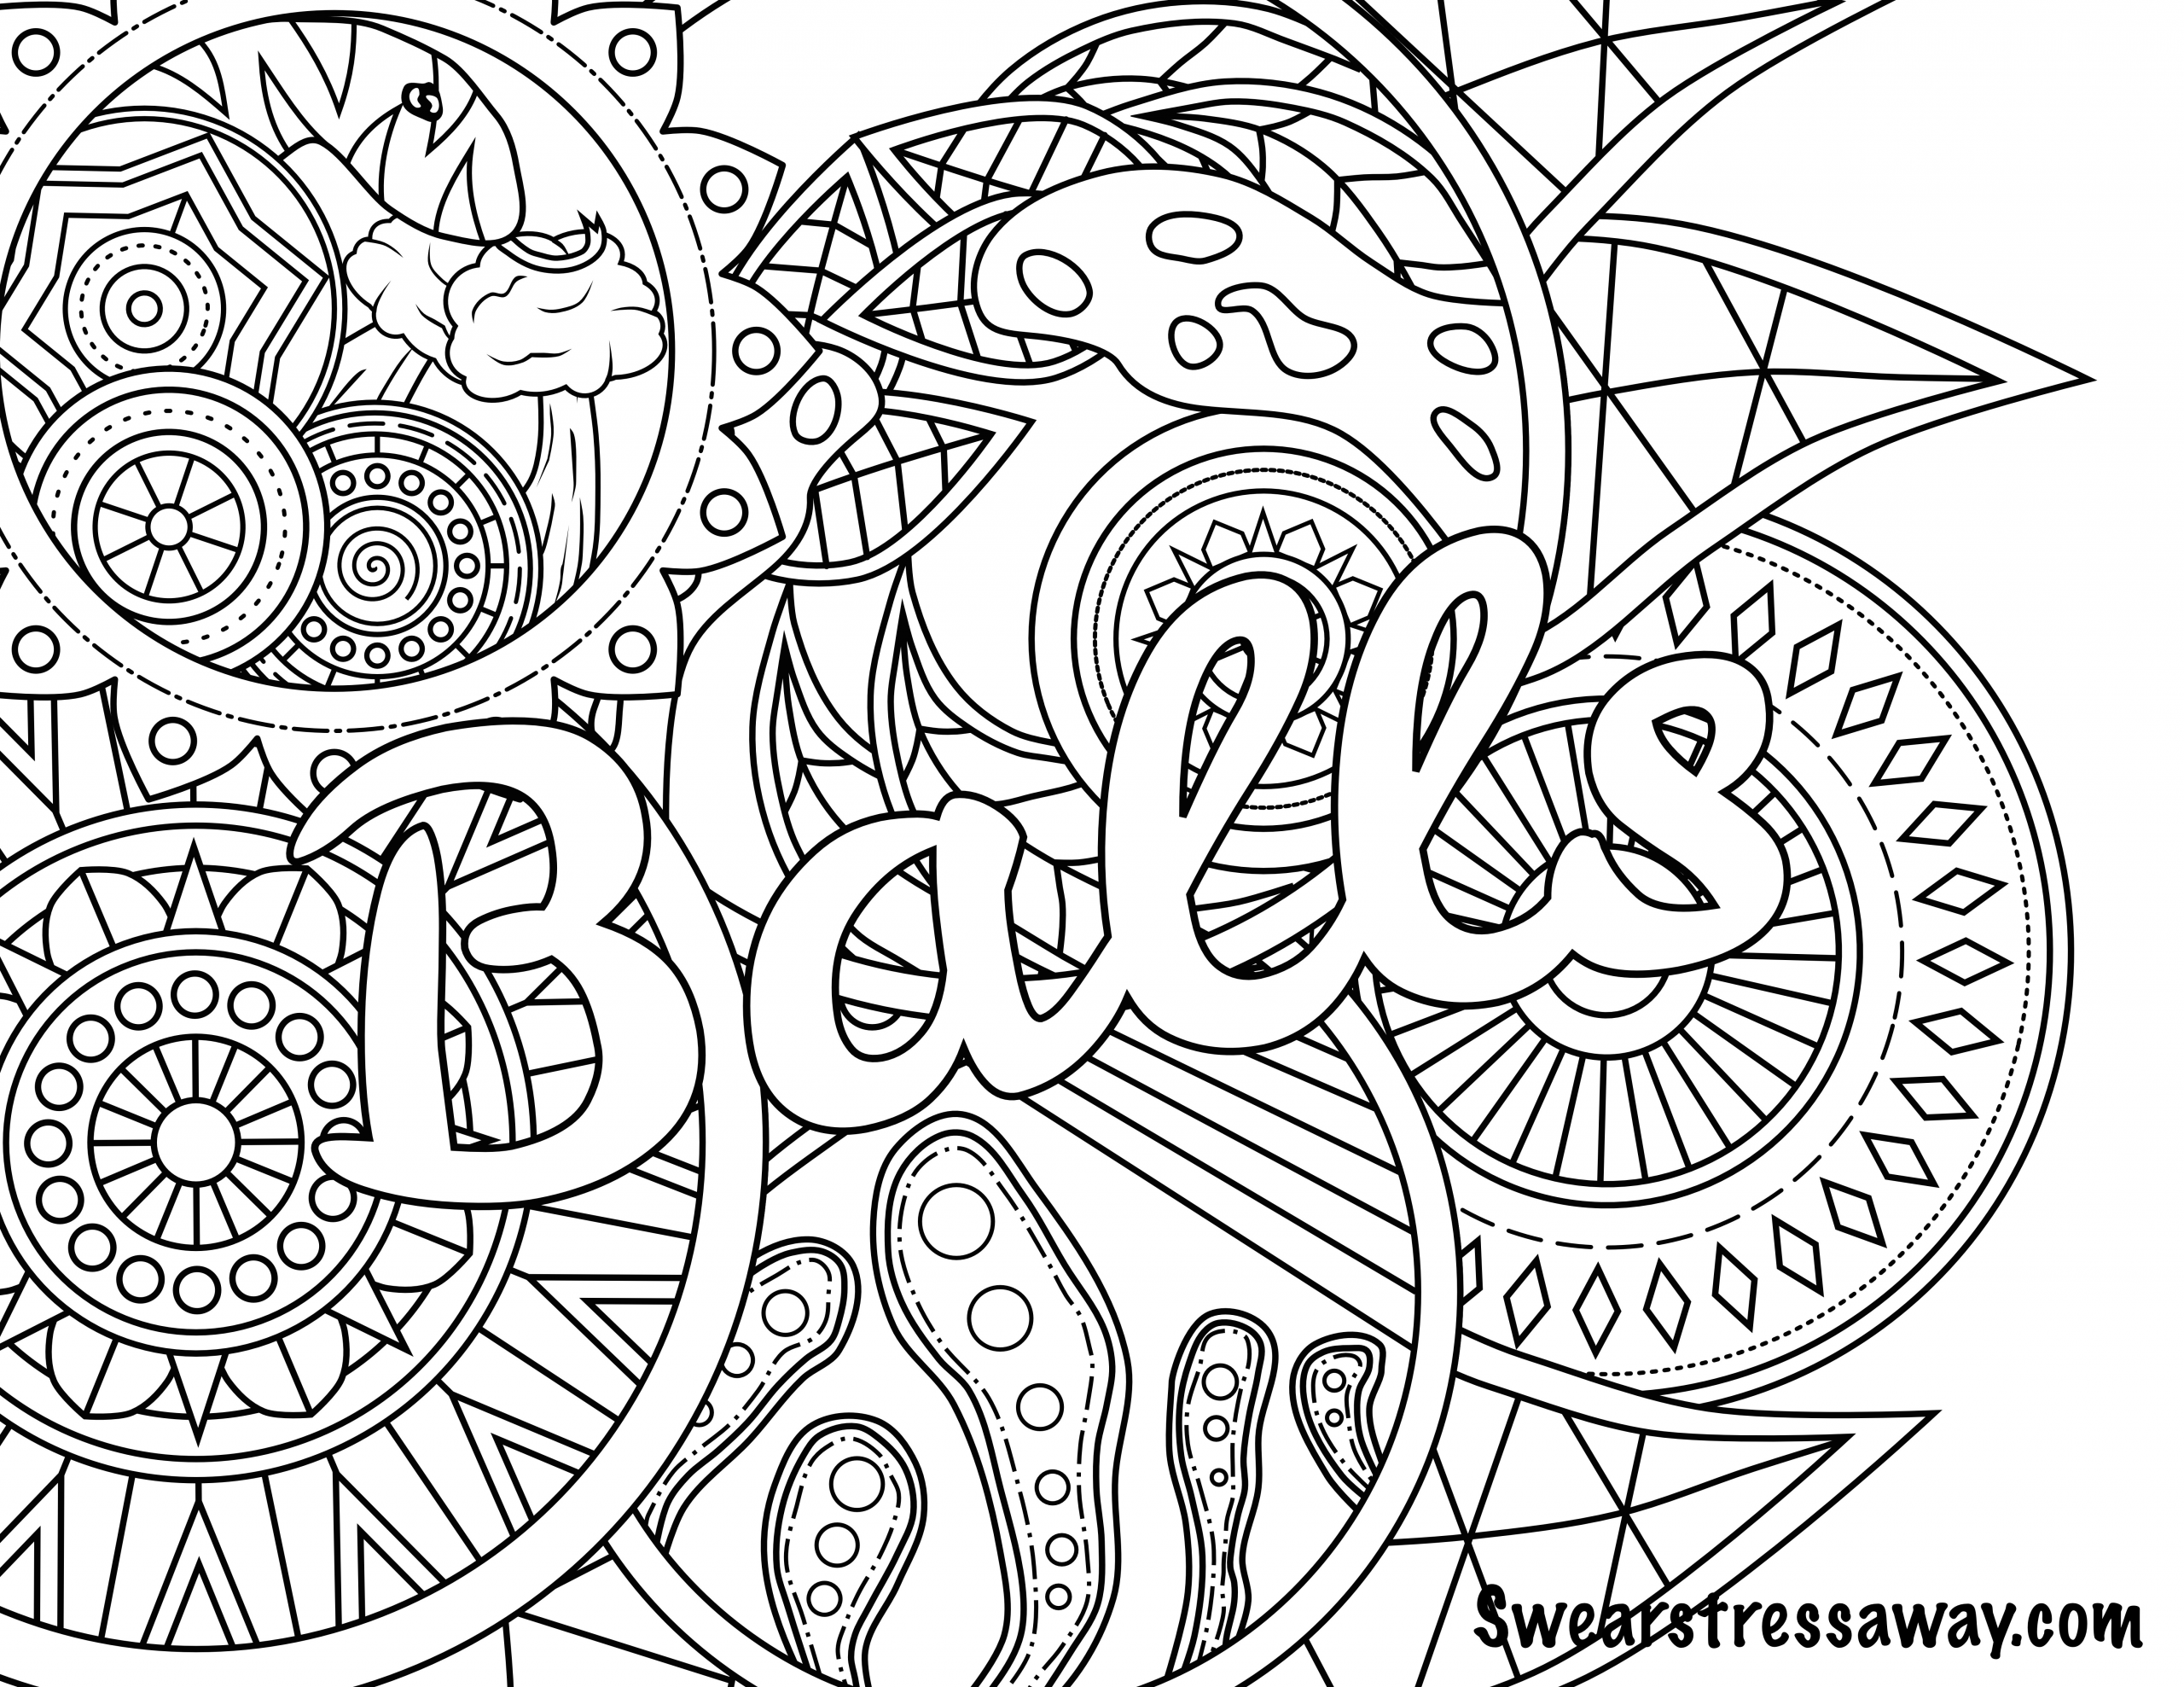 Adult Coloring Pages Swear Words
 The Best Ideas for Coloring Pages for Adults Words Best